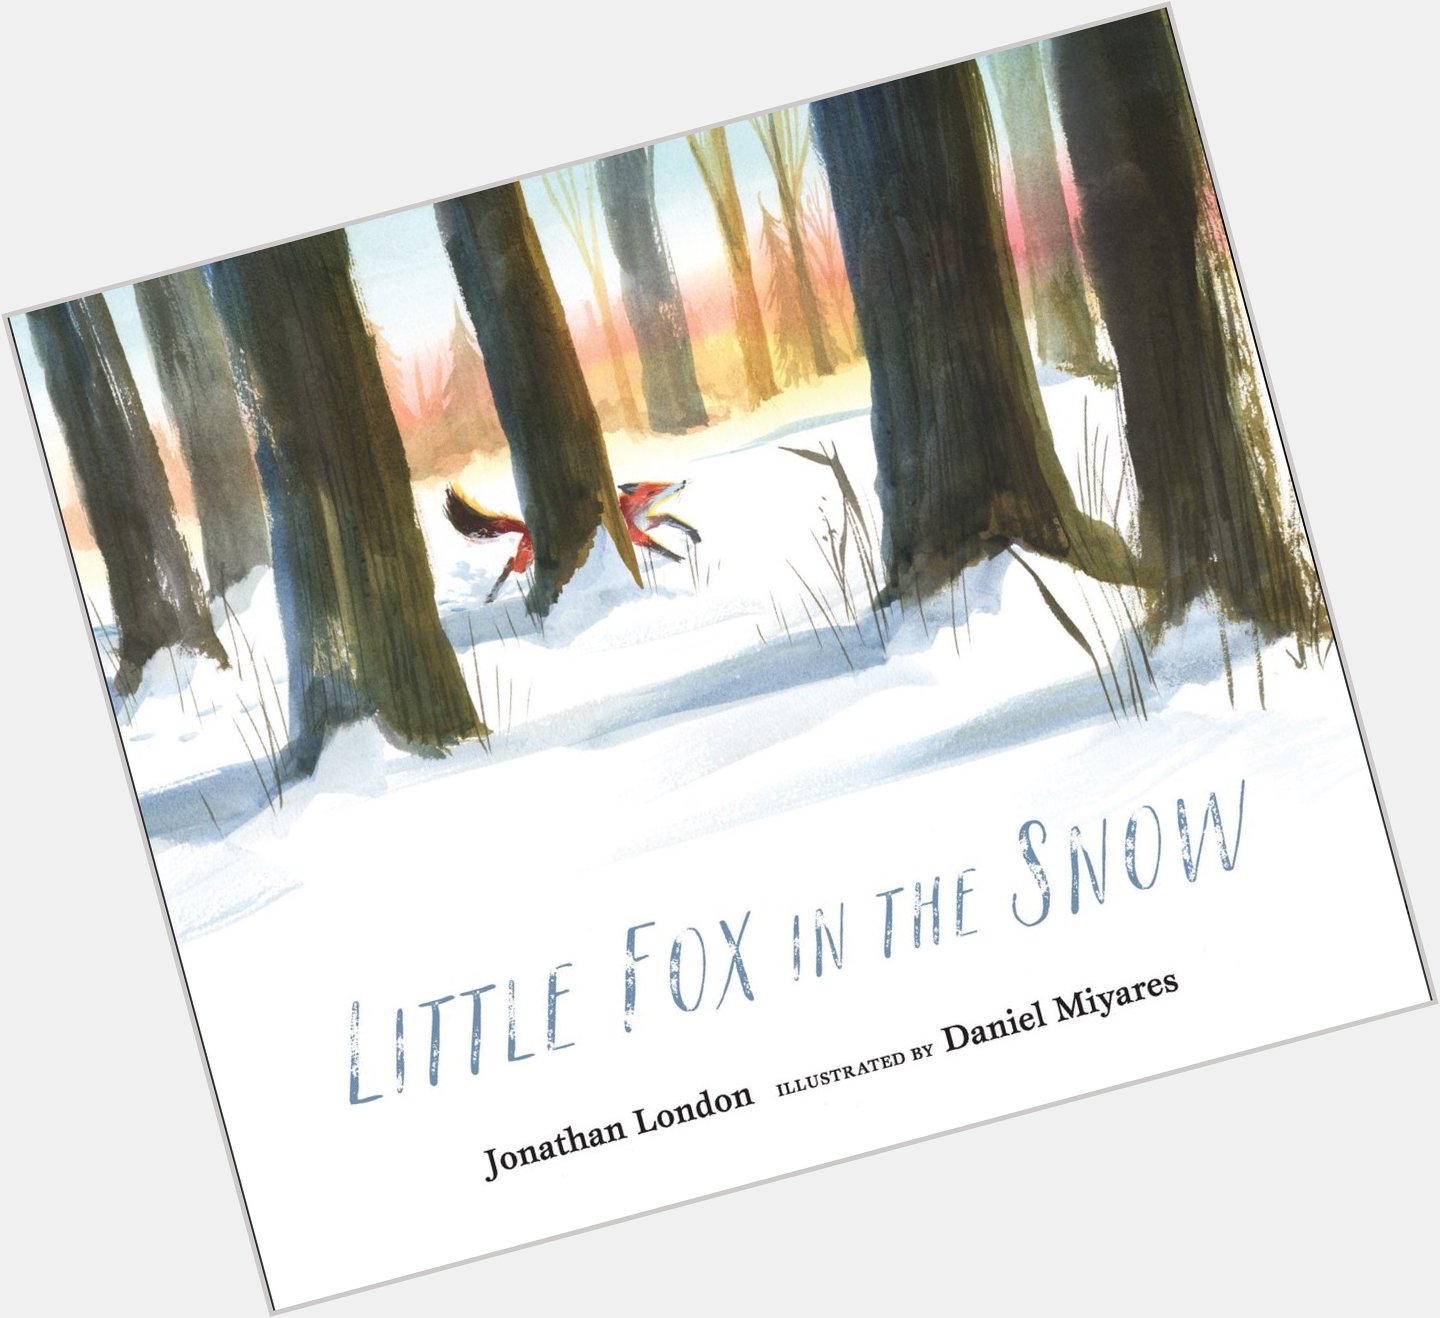 Happy book birthday to Jonathan London and LITTLE FOX IN THE SNOW! 